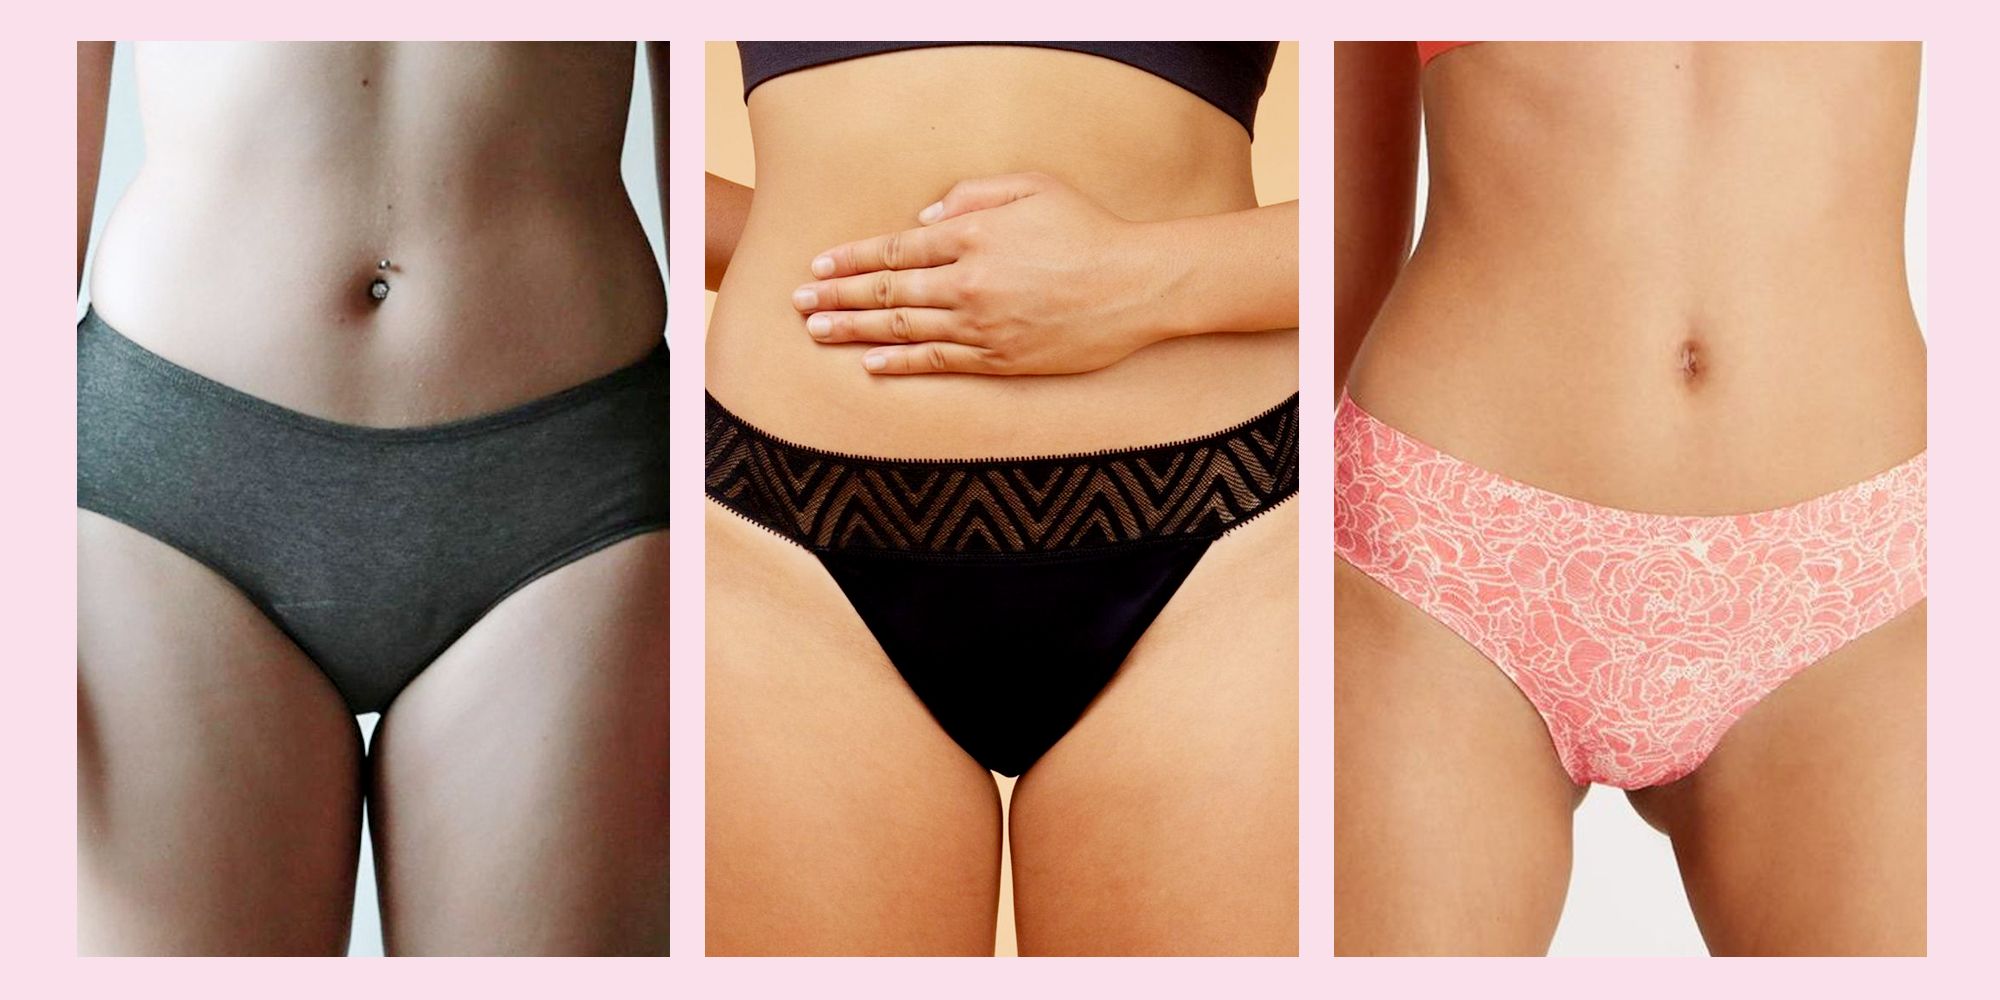 The Best Underwear for Your Period - 10 Must-Have Pairs of Period Panties